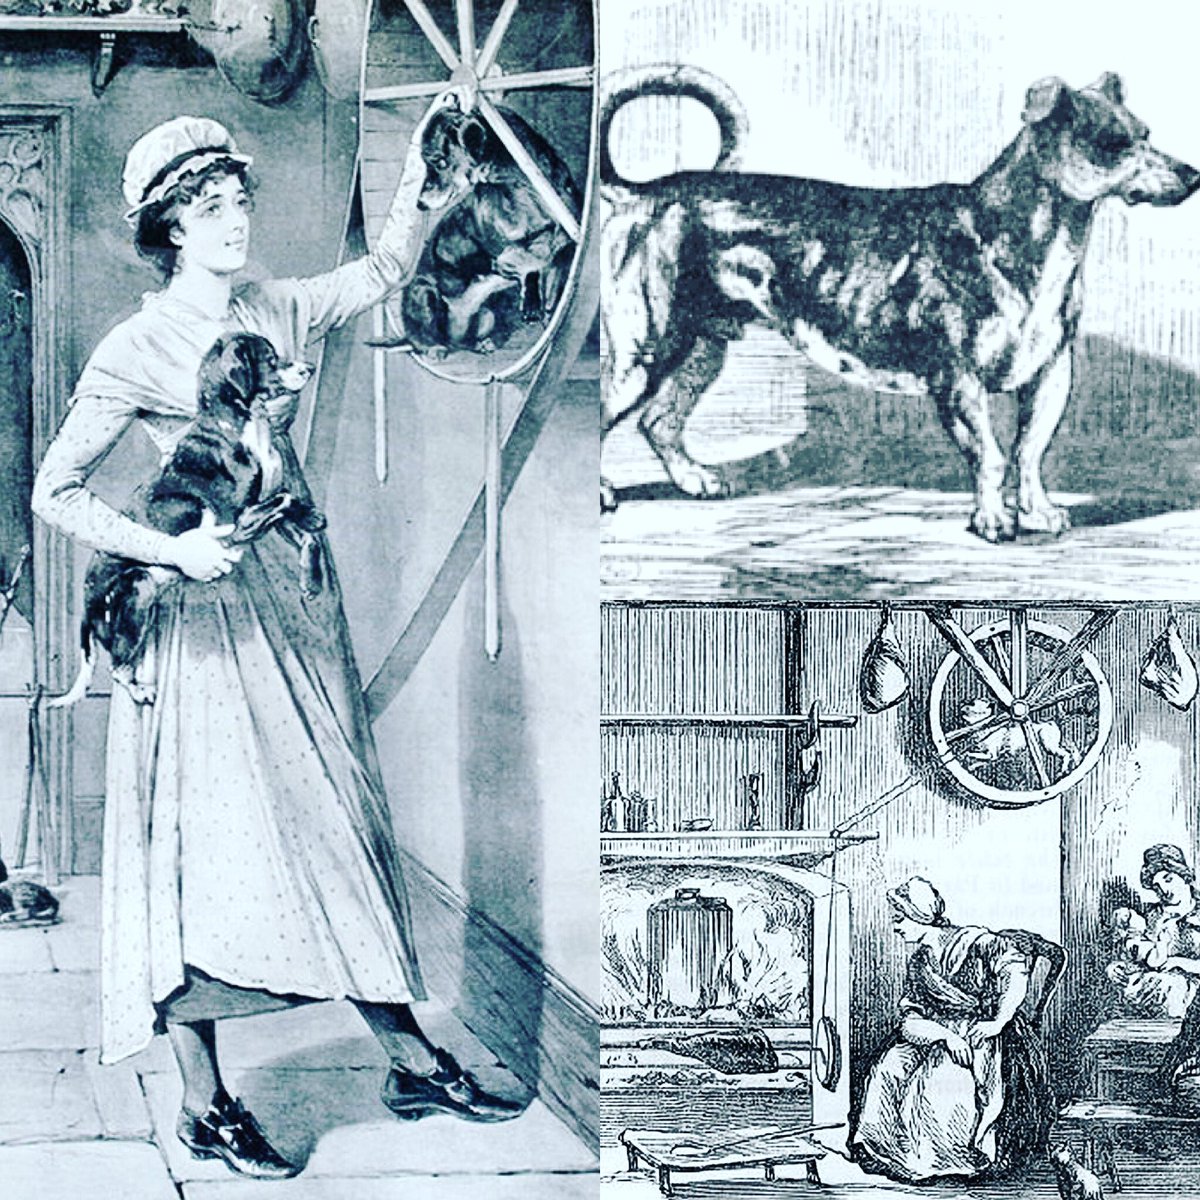 The History Cache Podcast On Twitter The Turnspit Dog Was Bred To Run On A Wheel That Turned Meat So It Would Cook Evenly Open Fire Roasting Required Constant Turning Of The Spit